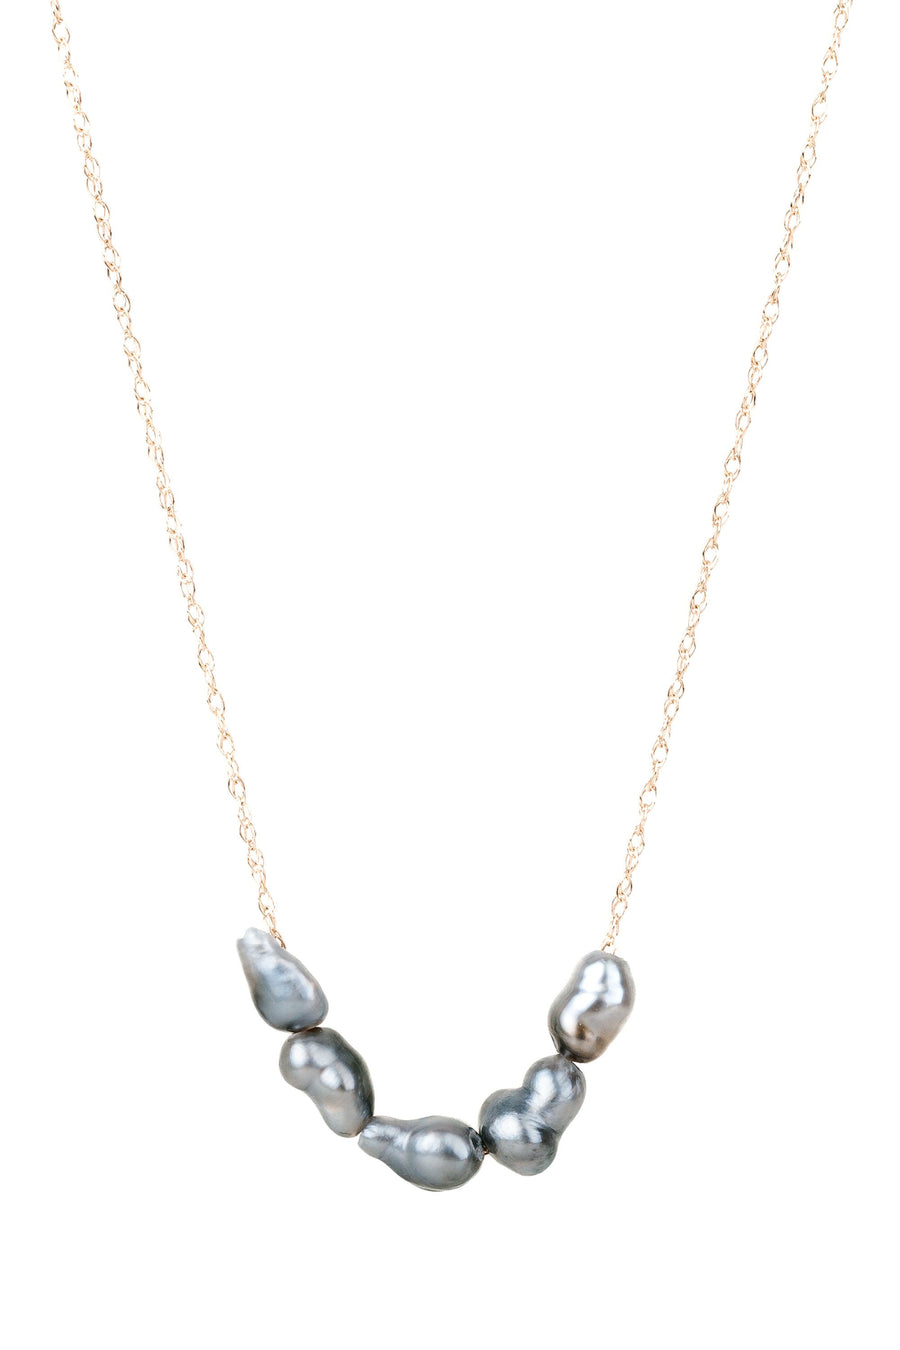 5 Ombré Tahitian Keshi Pearl Necklace - 14k Gold